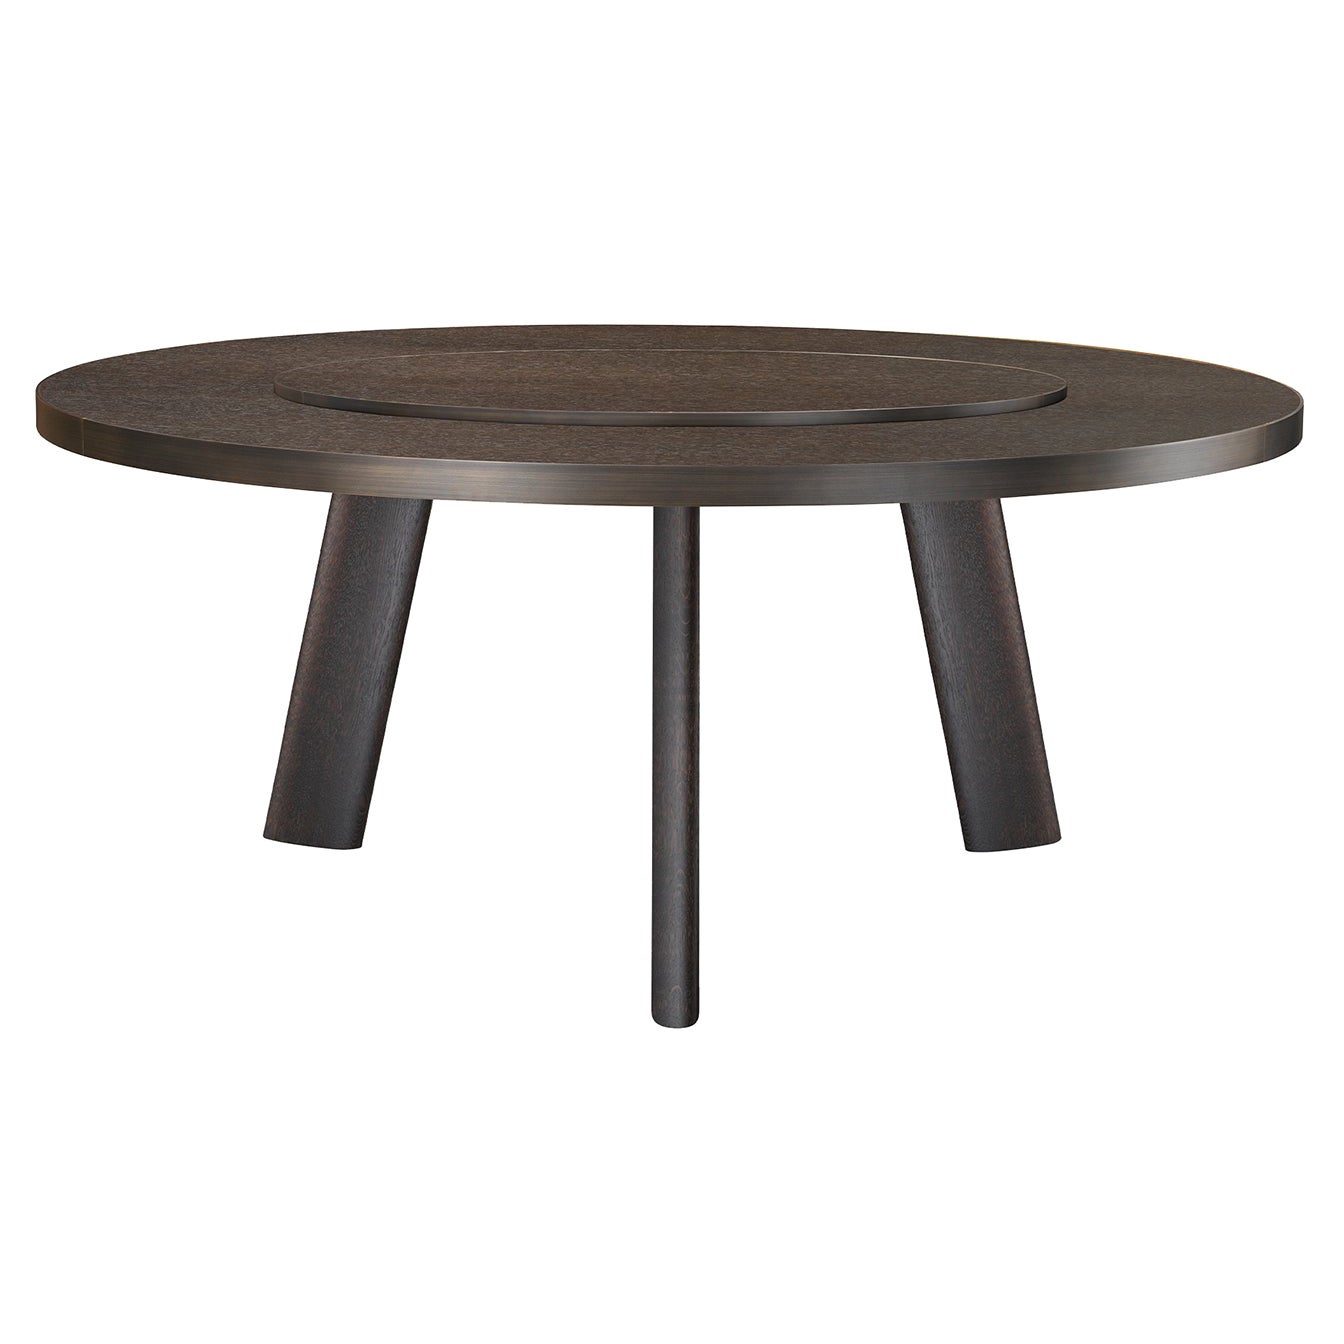 Native Round Brown Table by Stefano Giovannoni For Sale